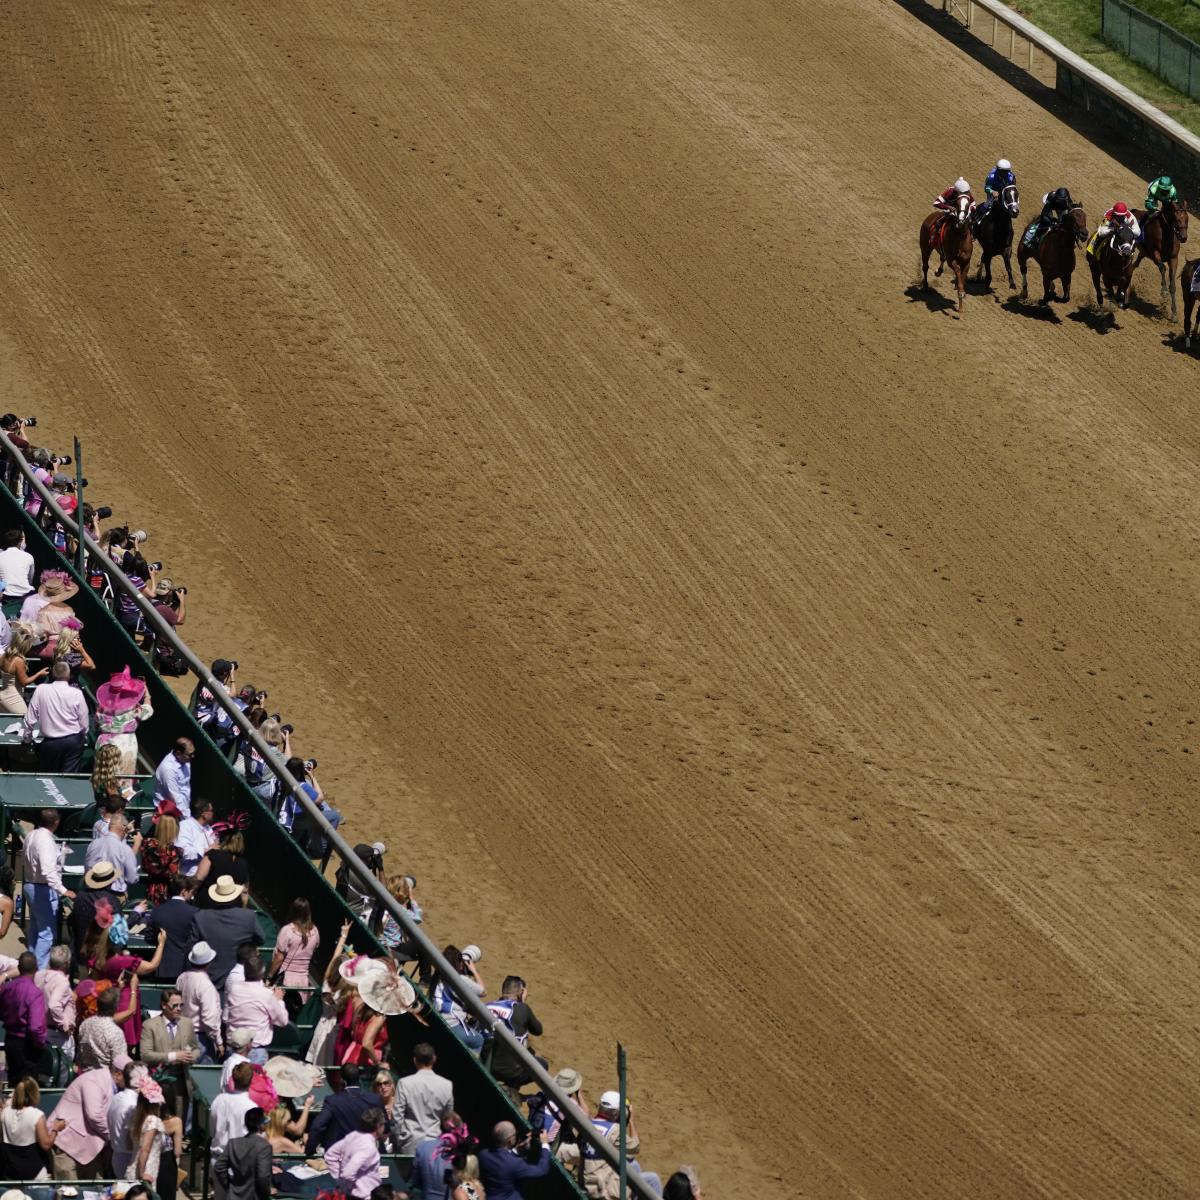 Kentucky Oaks Results 2021 Malathaat Wins in Photo Finish over Search